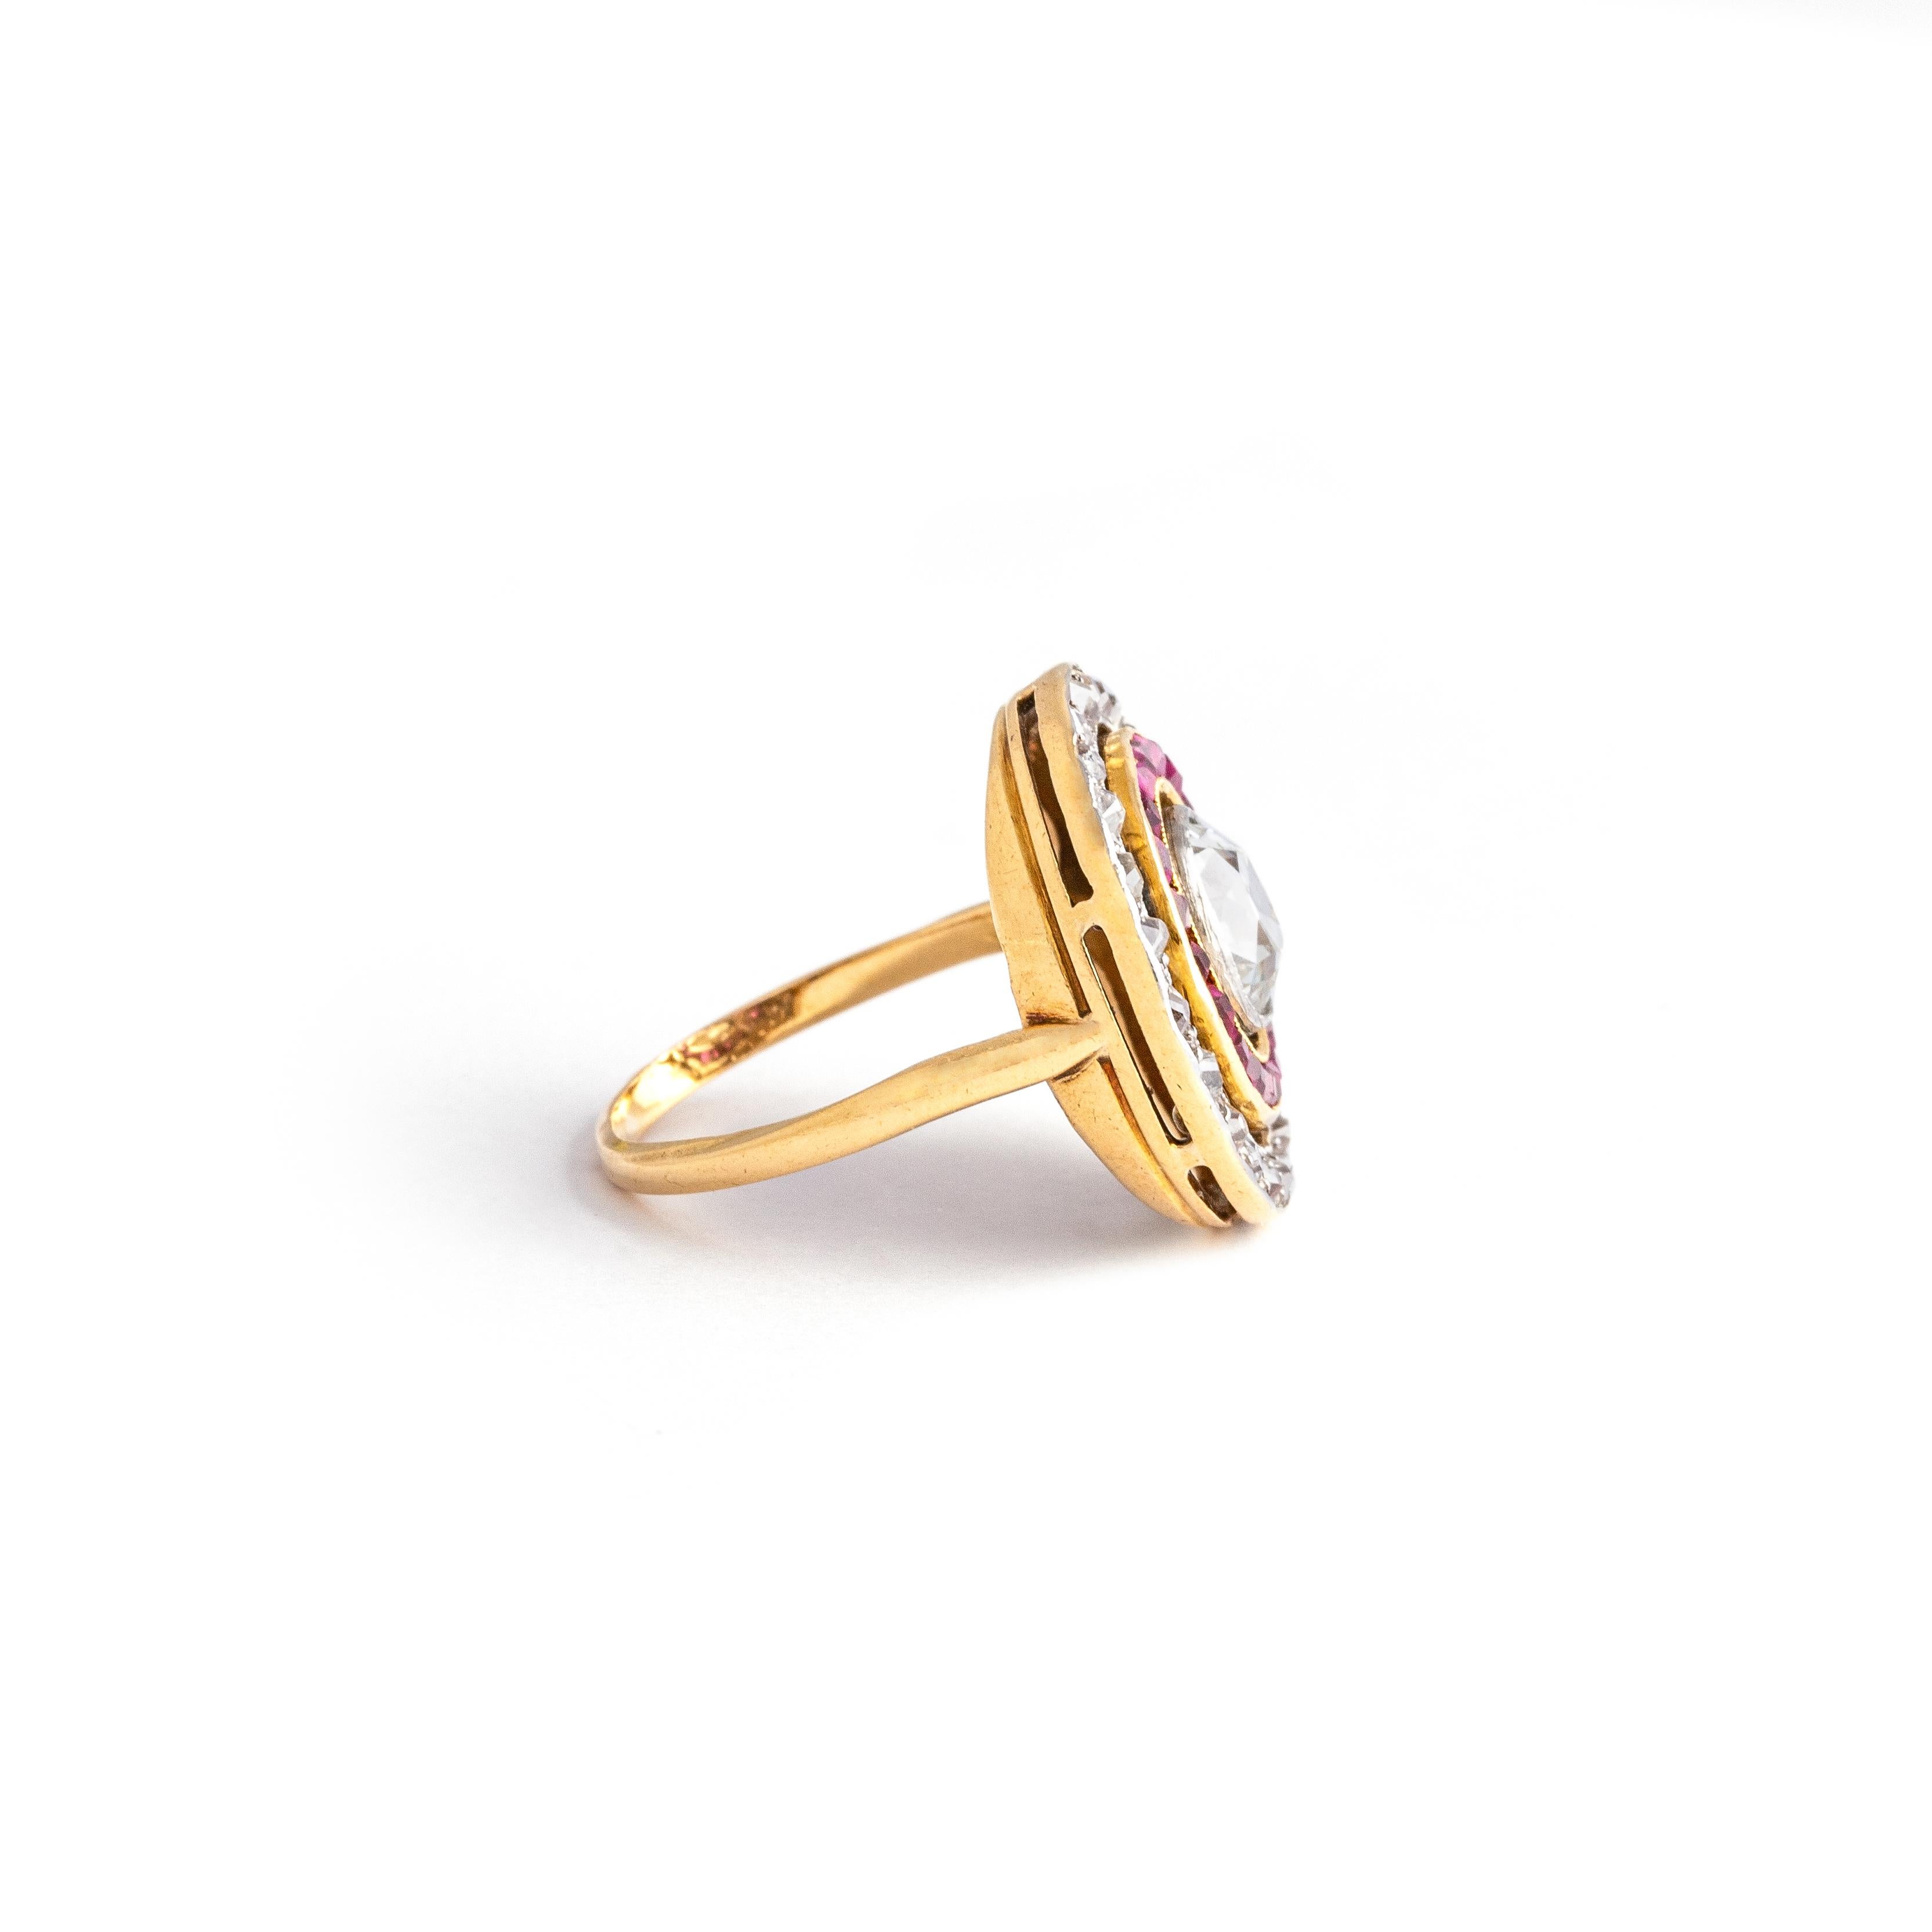 Old Mine Cut Antique Diamond and Ruby Gold Ring